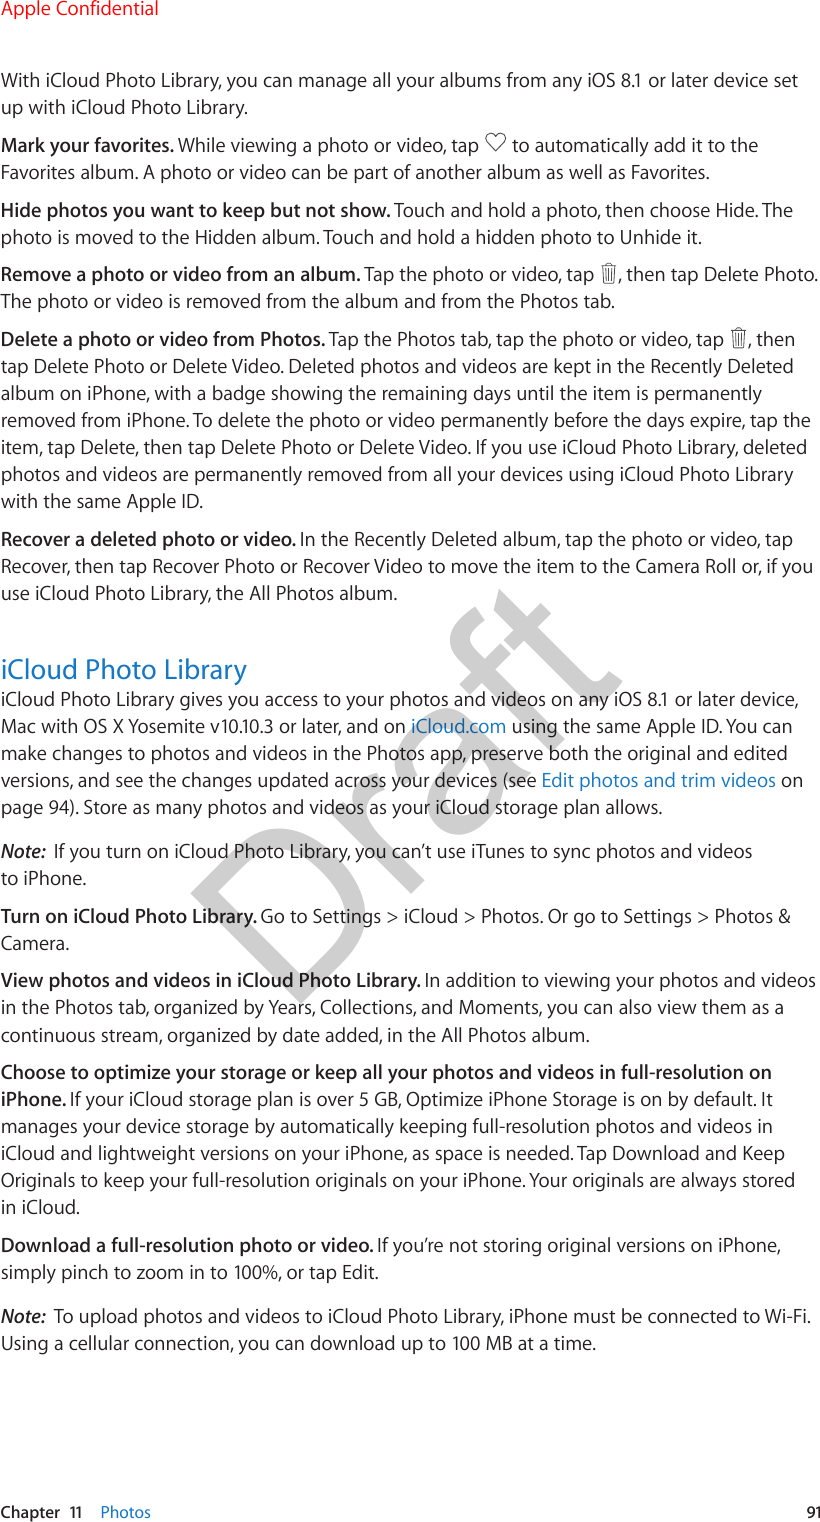 Chapter  11    Photos  91With iCloud Photo Library, you can manage all your albums from any iOS 8.1 or later device set up with iCloud Photo Library.Mark your favorites. While viewing a photo or video, tap   to automatically add it to the Favorites album. A photo or video can be part of another album as well as Favorites.Hide photos you want to keep but not show. Touch and hold a photo, then choose Hide. The photo is moved to the Hidden album. Touch and hold a hidden photo to Unhide it.Remove a photo or video from an album. Tap the photo or video, tap  , then tap Delete Photo. The photo or video is removed from the album and from the Photos tab.Delete a photo or video from Photos. Tap the Photos tab, tap the photo or video, tap  , then tap Delete Photo or Delete Video. Deleted photos and videos are kept in the Recently Deleted album on iPhone, with a badge showing the remaining days until the item is permanently removed from iPhone. To delete the photo or video permanently before the days expire, tap the item, tap Delete, then tap Delete Photo or Delete Video. If you use iCloud Photo Library, deleted photos and videos are permanently removed from all your devices using iCloud Photo Library with the same Apple ID.Recover a deleted photo or video. In the Recently Deleted album, tap the photo or video, tap Recover, then tap Recover Photo or Recover Video to move the item to the Camera Roll or, if you use iCloud Photo Library, the All Photos album.iCloud Photo LibraryiCloud Photo Library gives you access to your photos and videos on any iOS 8.1 or later device, Mac with OS X Yosemite v10.10.3 or later, and on iCloud.com using the same Apple ID. You can make changes to photos and videos in the Photos app, preserve both the original and edited versions, and see the changes updated across your devices (see Edit photos and trim videos on page 94). Store as many photos and videos as your iCloud storage plan allows.Note:  If you turn on iCloud Photo Library, you can’t use iTunes to sync photos and videos to iPhone.Turn on iCloud Photo Library. Go to Settings &gt; iCloud &gt; Photos. Or go to Settings &gt; Photos &amp; Camera.View photos and videos in iCloud Photo Library. In addition to viewing your photos and videos in the Photos tab, organized by Years, Collections, and Moments, you can also view them as a continuous stream, organized by date added, in the All Photos album.Choose to optimize your storage or keep all your photos and videos in full-resolution on iPhone. If your iCloud storage plan is over 5 GB, Optimize iPhone Storage is on by default. It manages your device storage by automatically keeping full-resolution photos and videos in iCloud and lightweight versions on your iPhone, as space is needed. Tap Download and Keep Originals to keep your full-resolution originals on your iPhone. Your originals are always stored in iCloud.Download a full-resolution photo or video. If you’re not storing original versions on iPhone, simply pinch to zoom in to 100%, or tap Edit.Note:  To upload photos and videos to iCloud Photo Library, iPhone must be connected to Wi-Fi. Using a cellular connection, you can download up to 100 MB at a time.Apple ConfidentialDraft